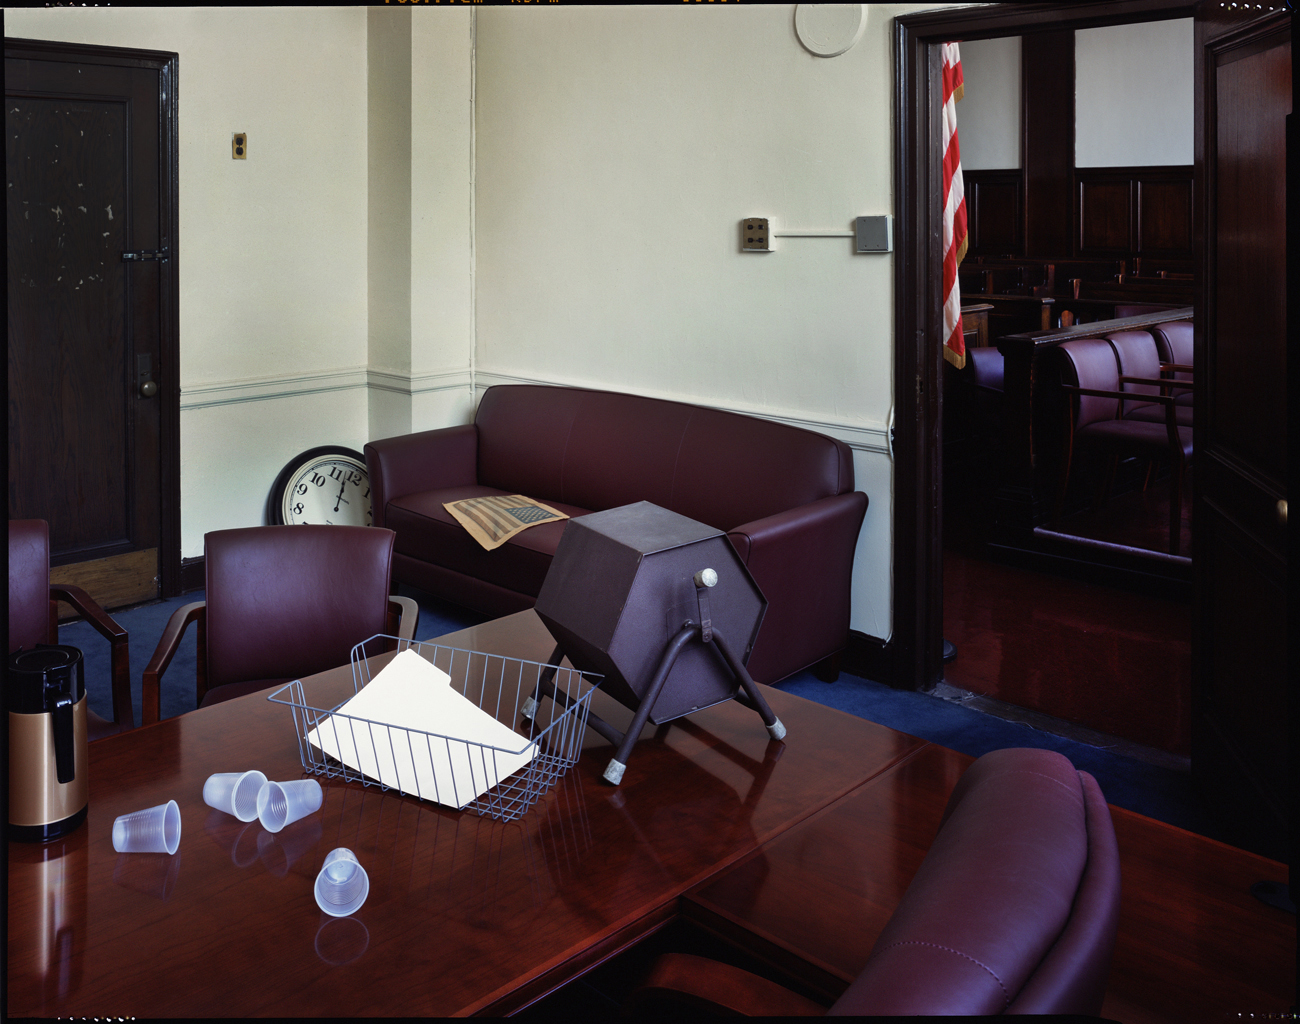 Judge’s chambers, Federal Courthouse, Brooklyn, New York, 2014